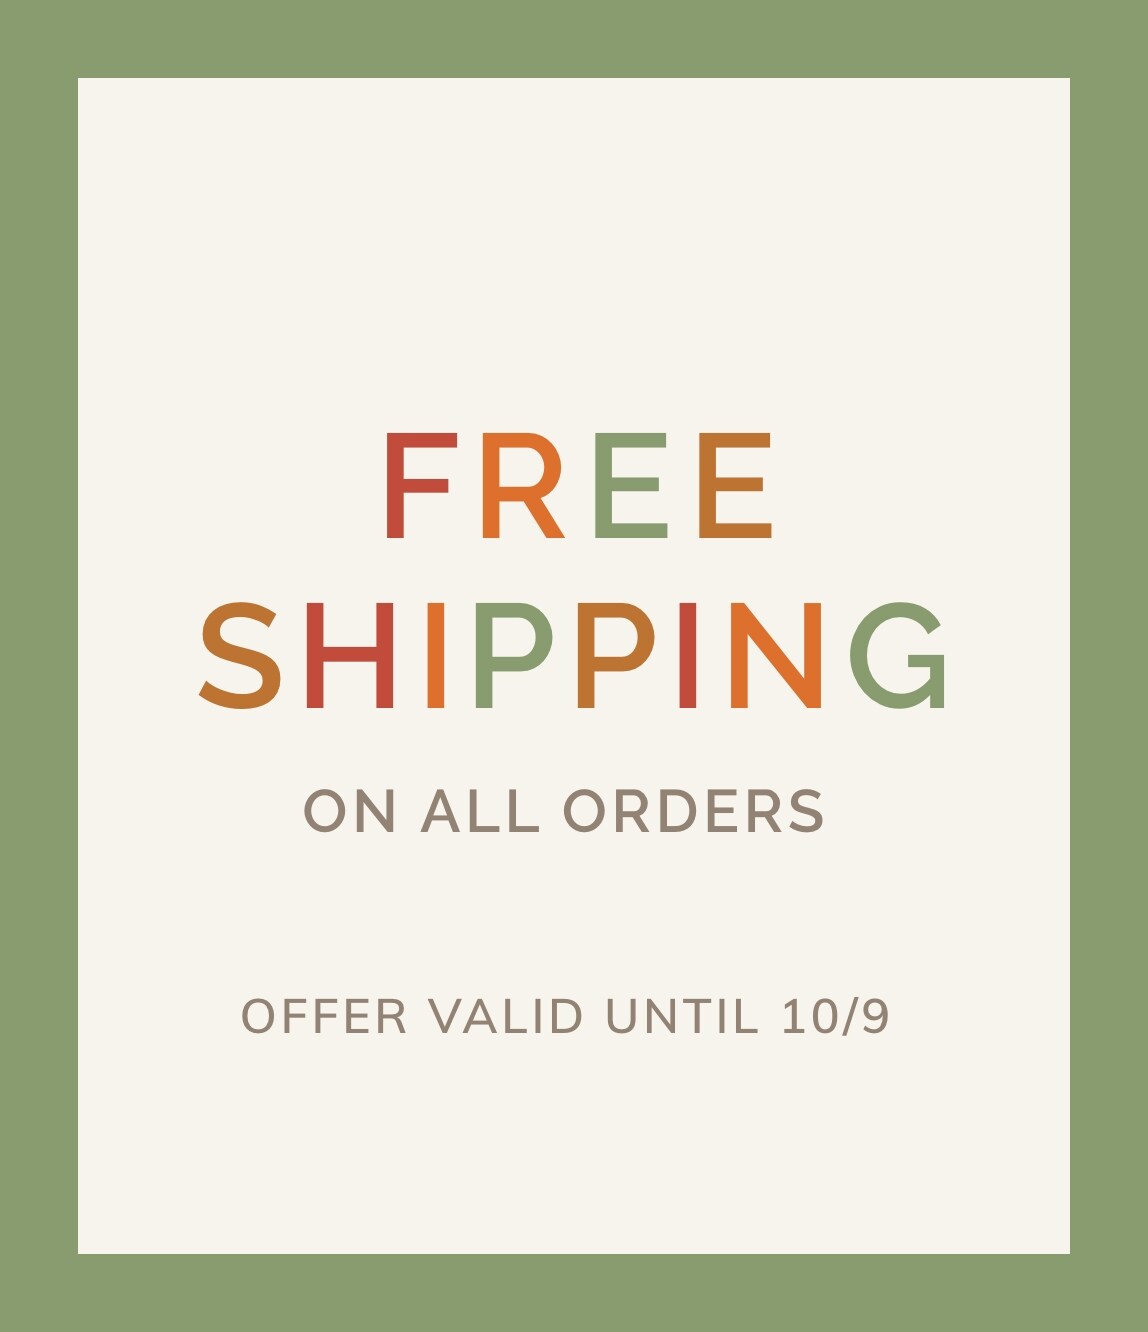 FREE SHIPPING ON ALL ORDERS. OFFER VALID UNTIL 10/9.